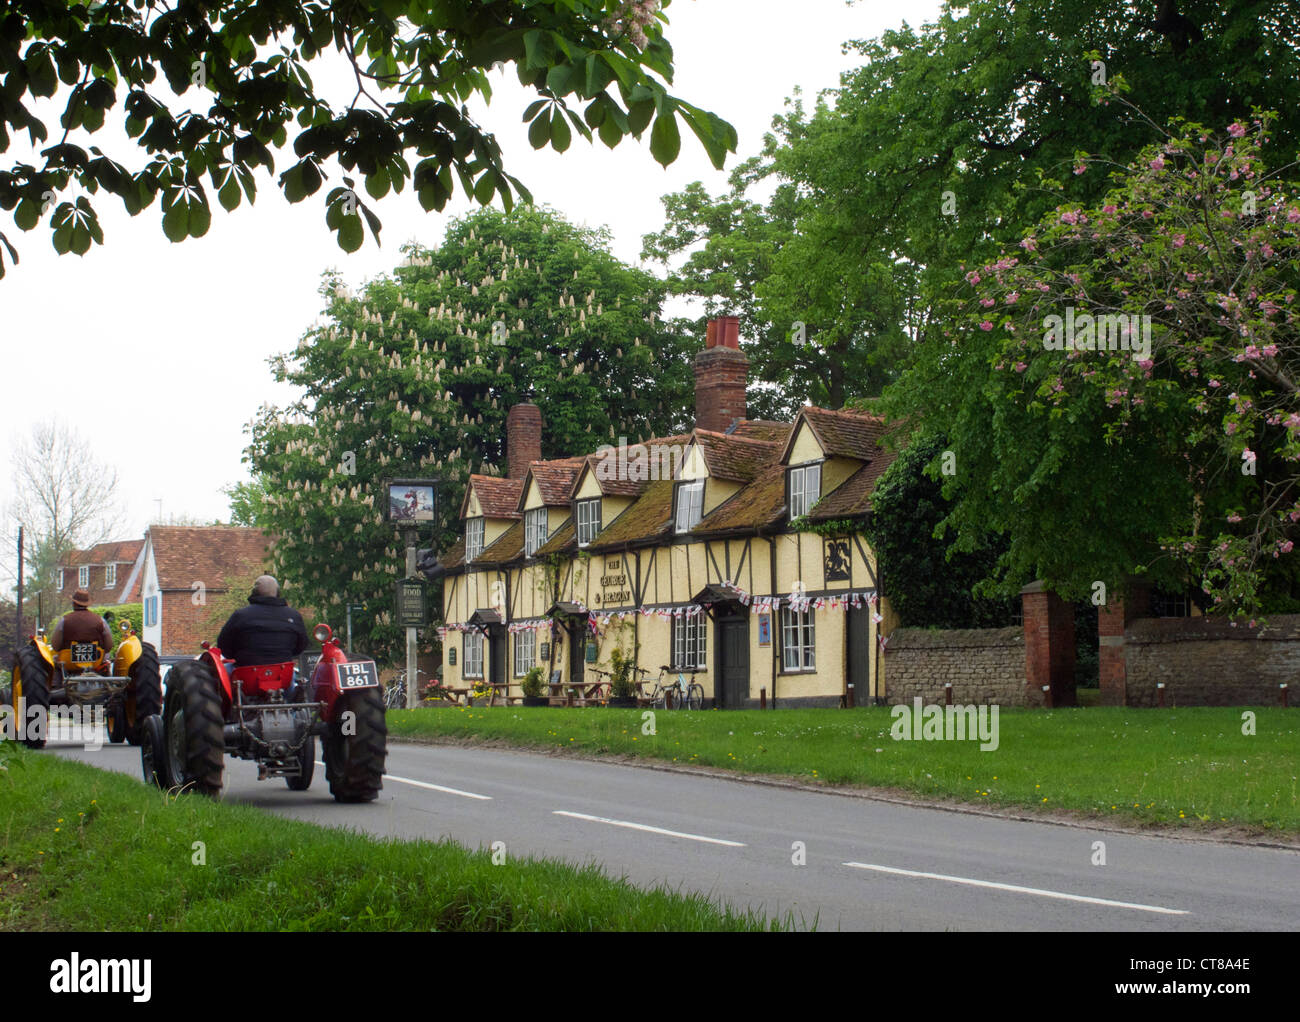 George and Dragon public house in Sutton Courtenay, Oxfordshire. Two tractors drive past. Stock Photo